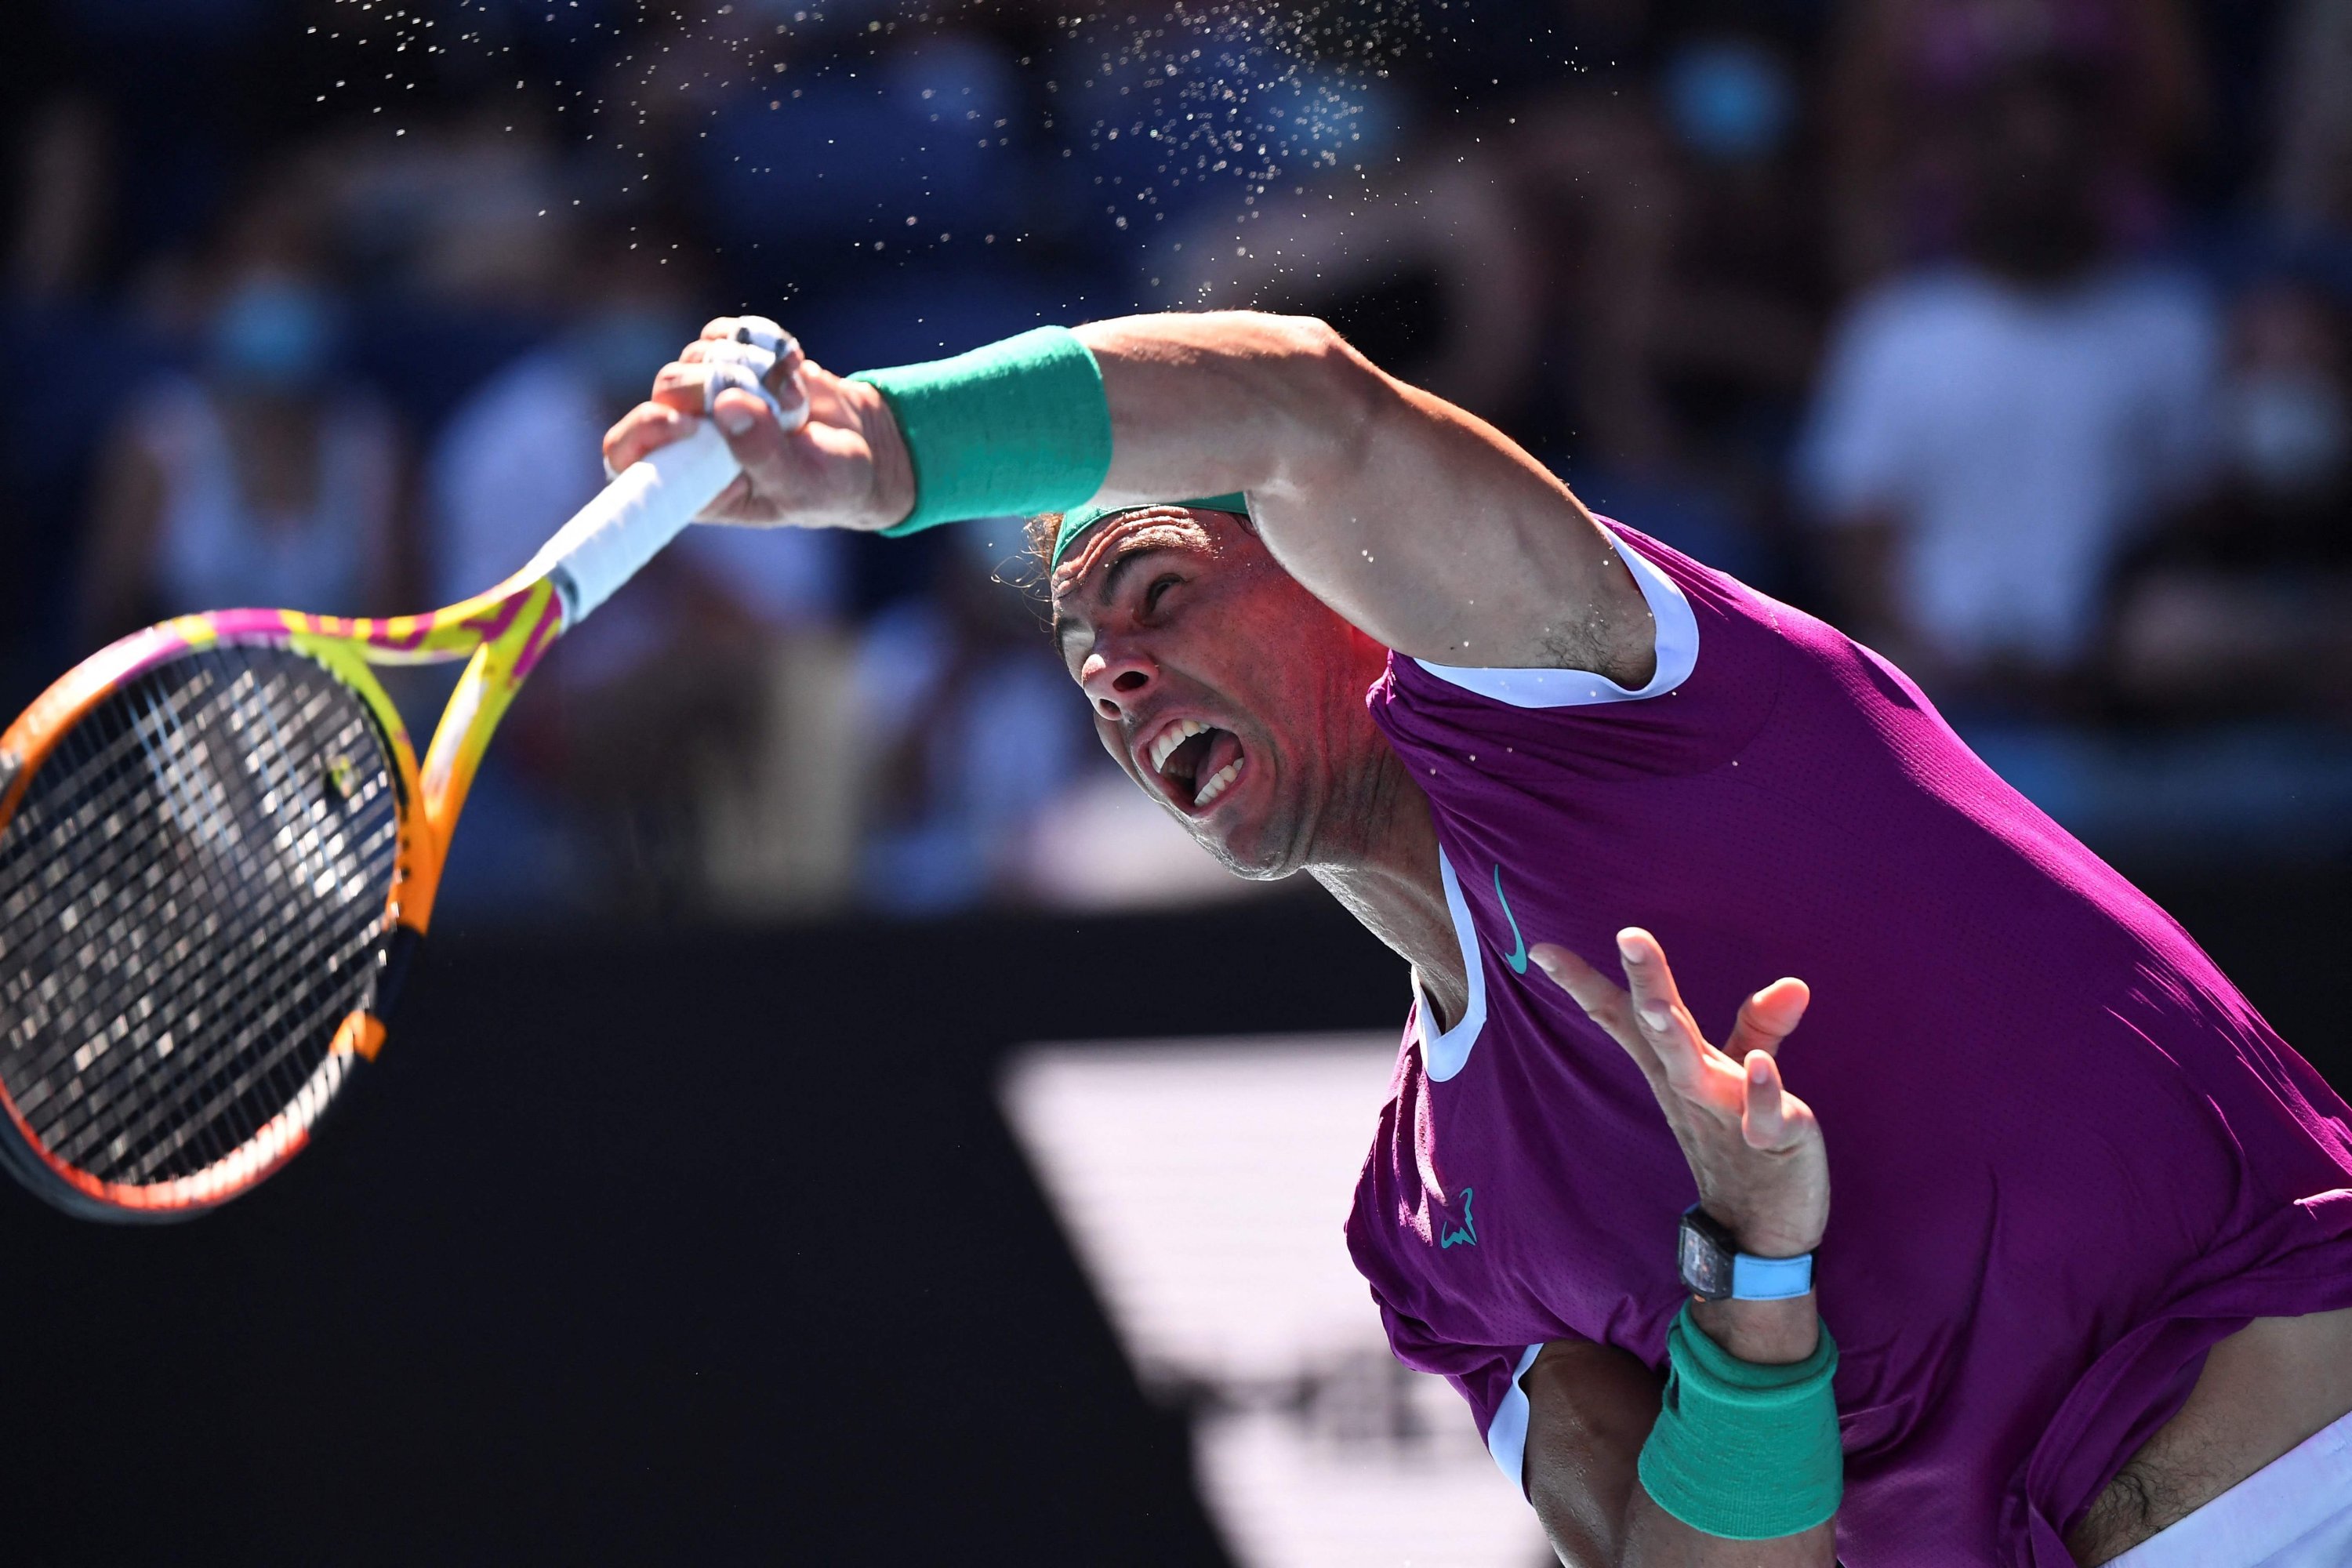 Ailing Nadal, unstoppable Barty reach Australian Open semifinals Daily Sabah